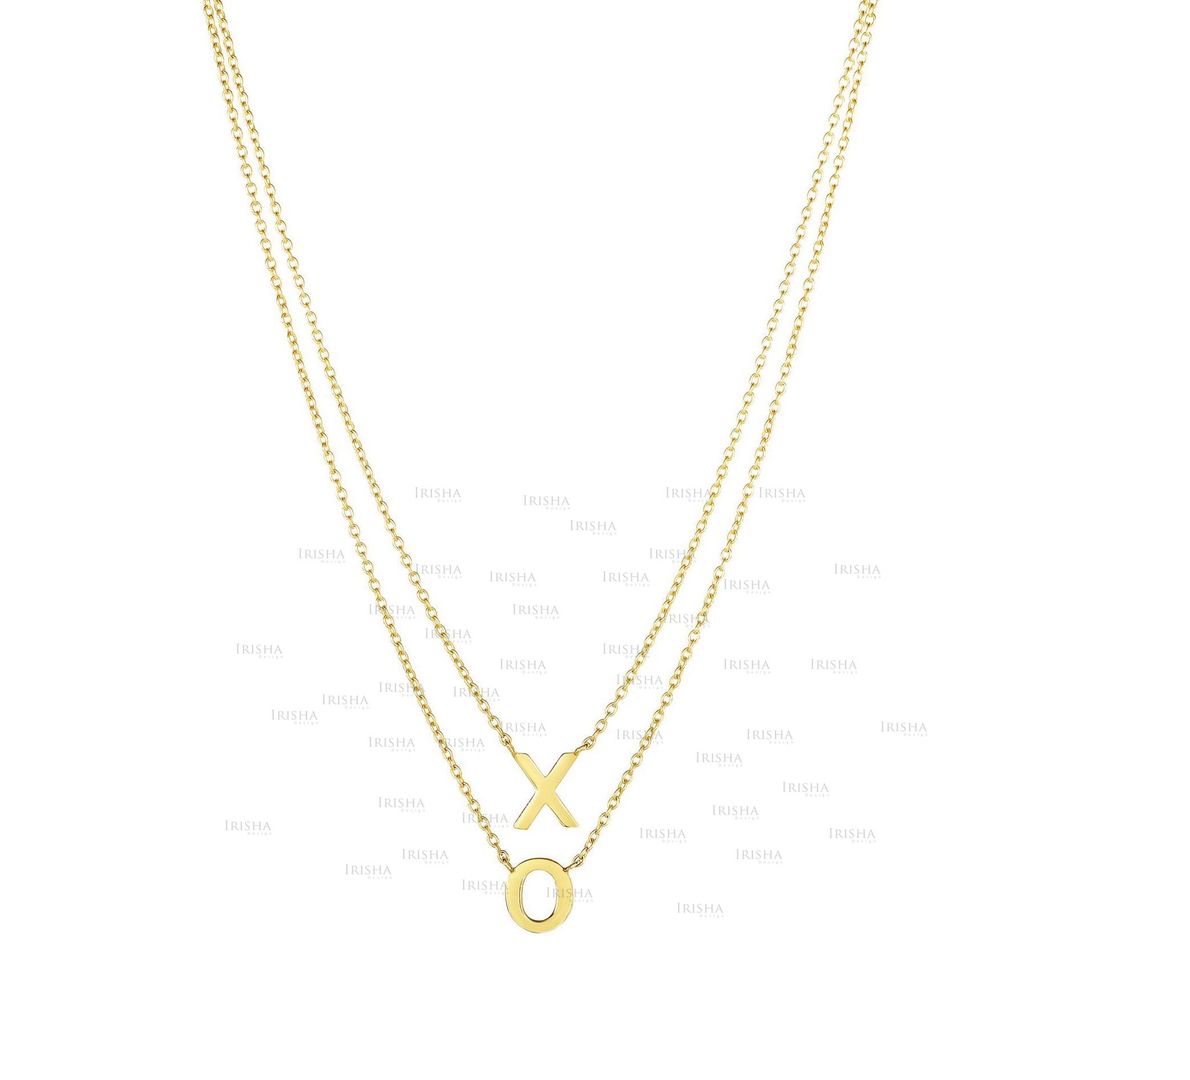 14K Yellow Gold 17" Shiny "XO" On Single Into Double Strand Oval Link Necklace